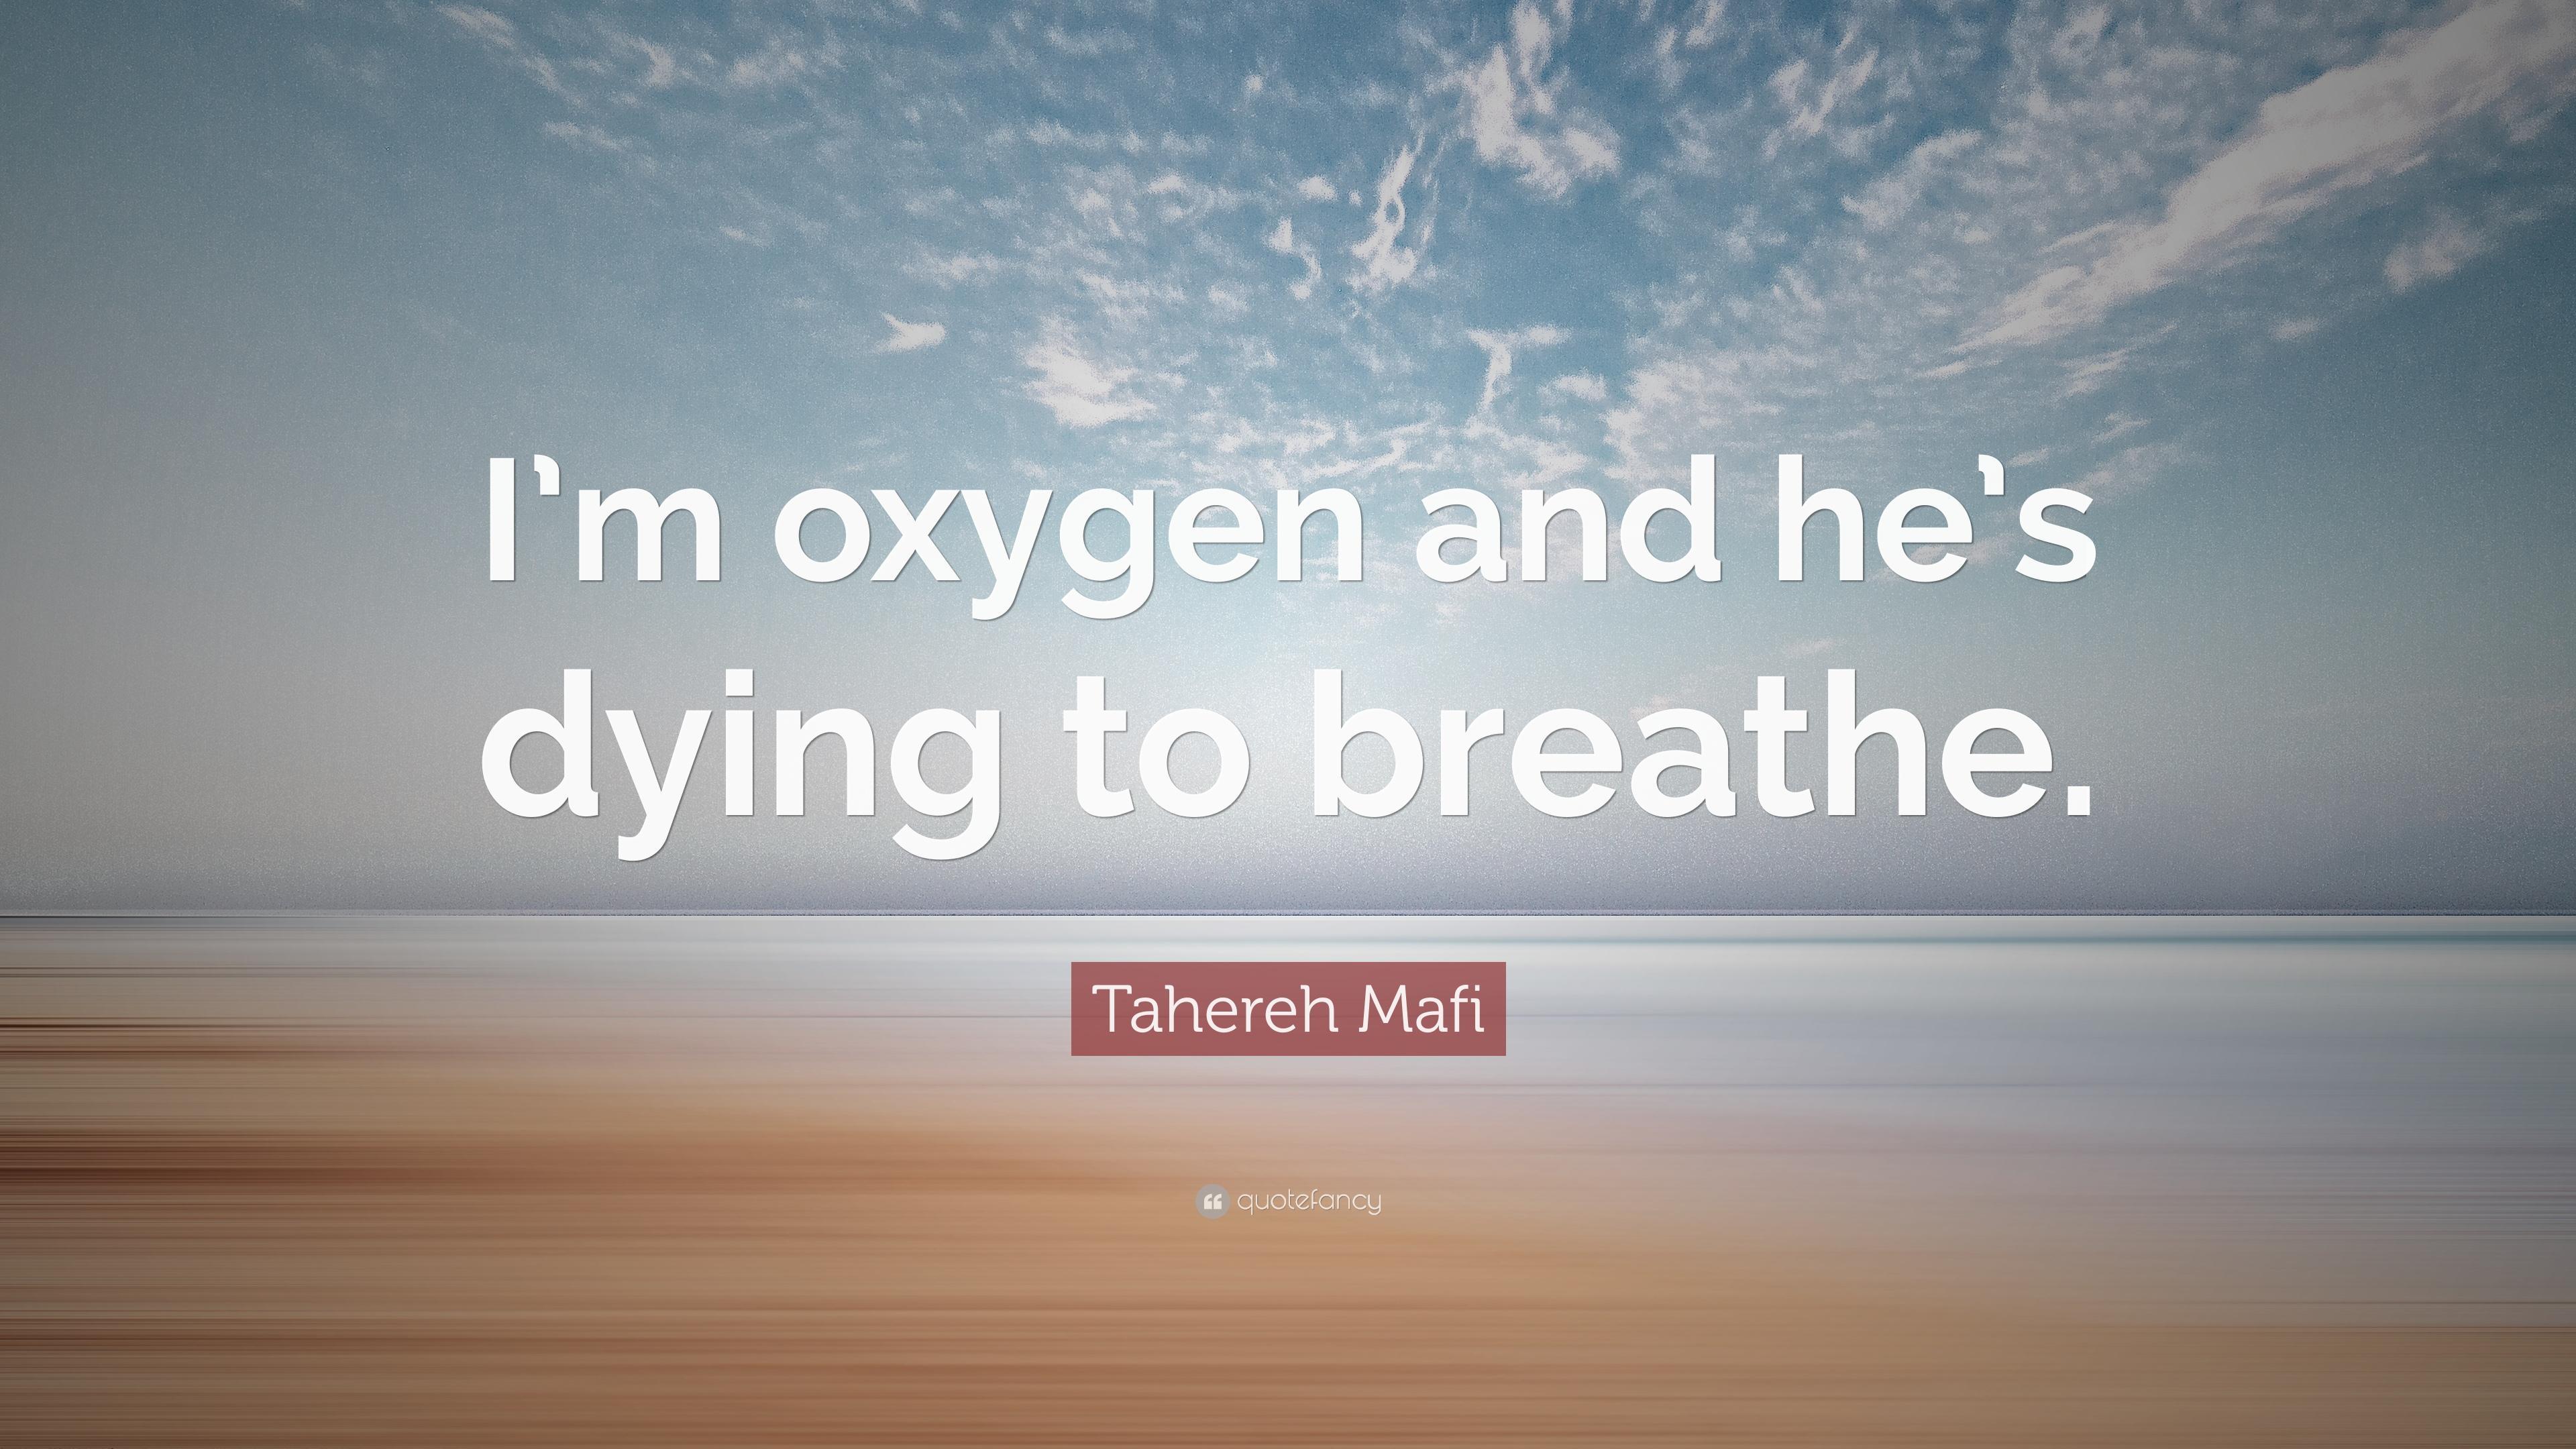 Tahereh Mafi Quote: “I'm oxygen and he's dying to breathe